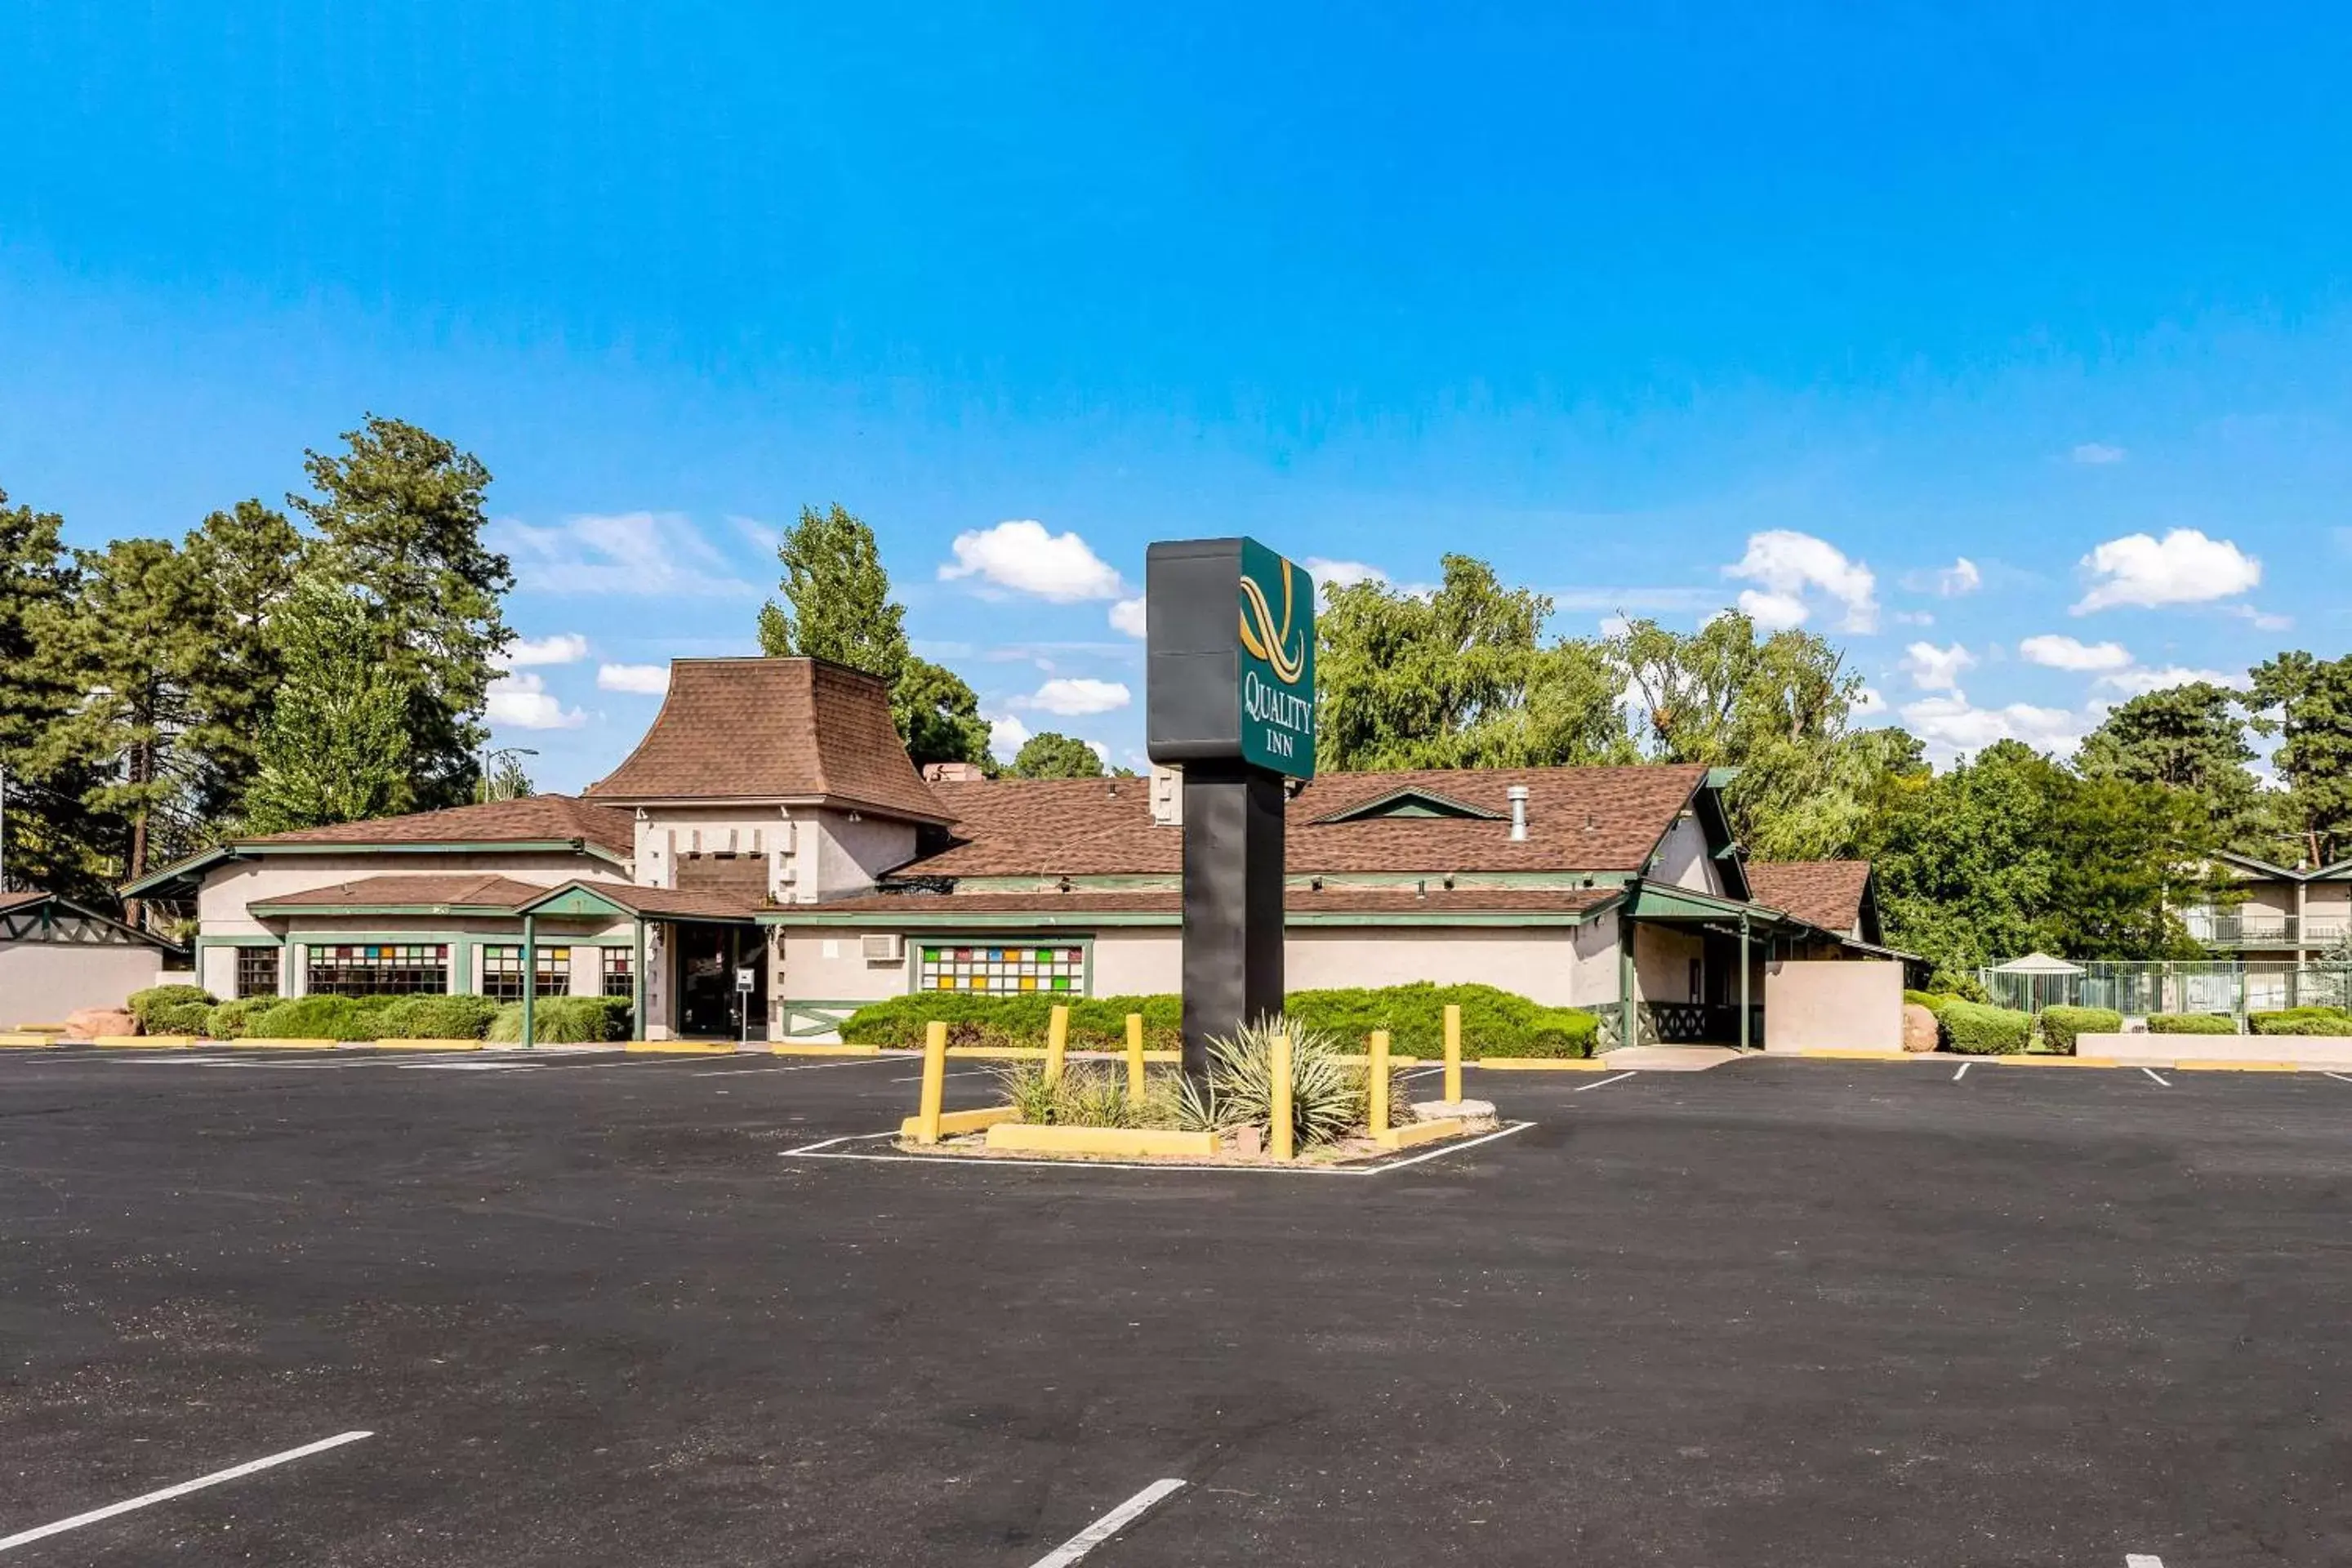 Property Building in Quality Inn Payson